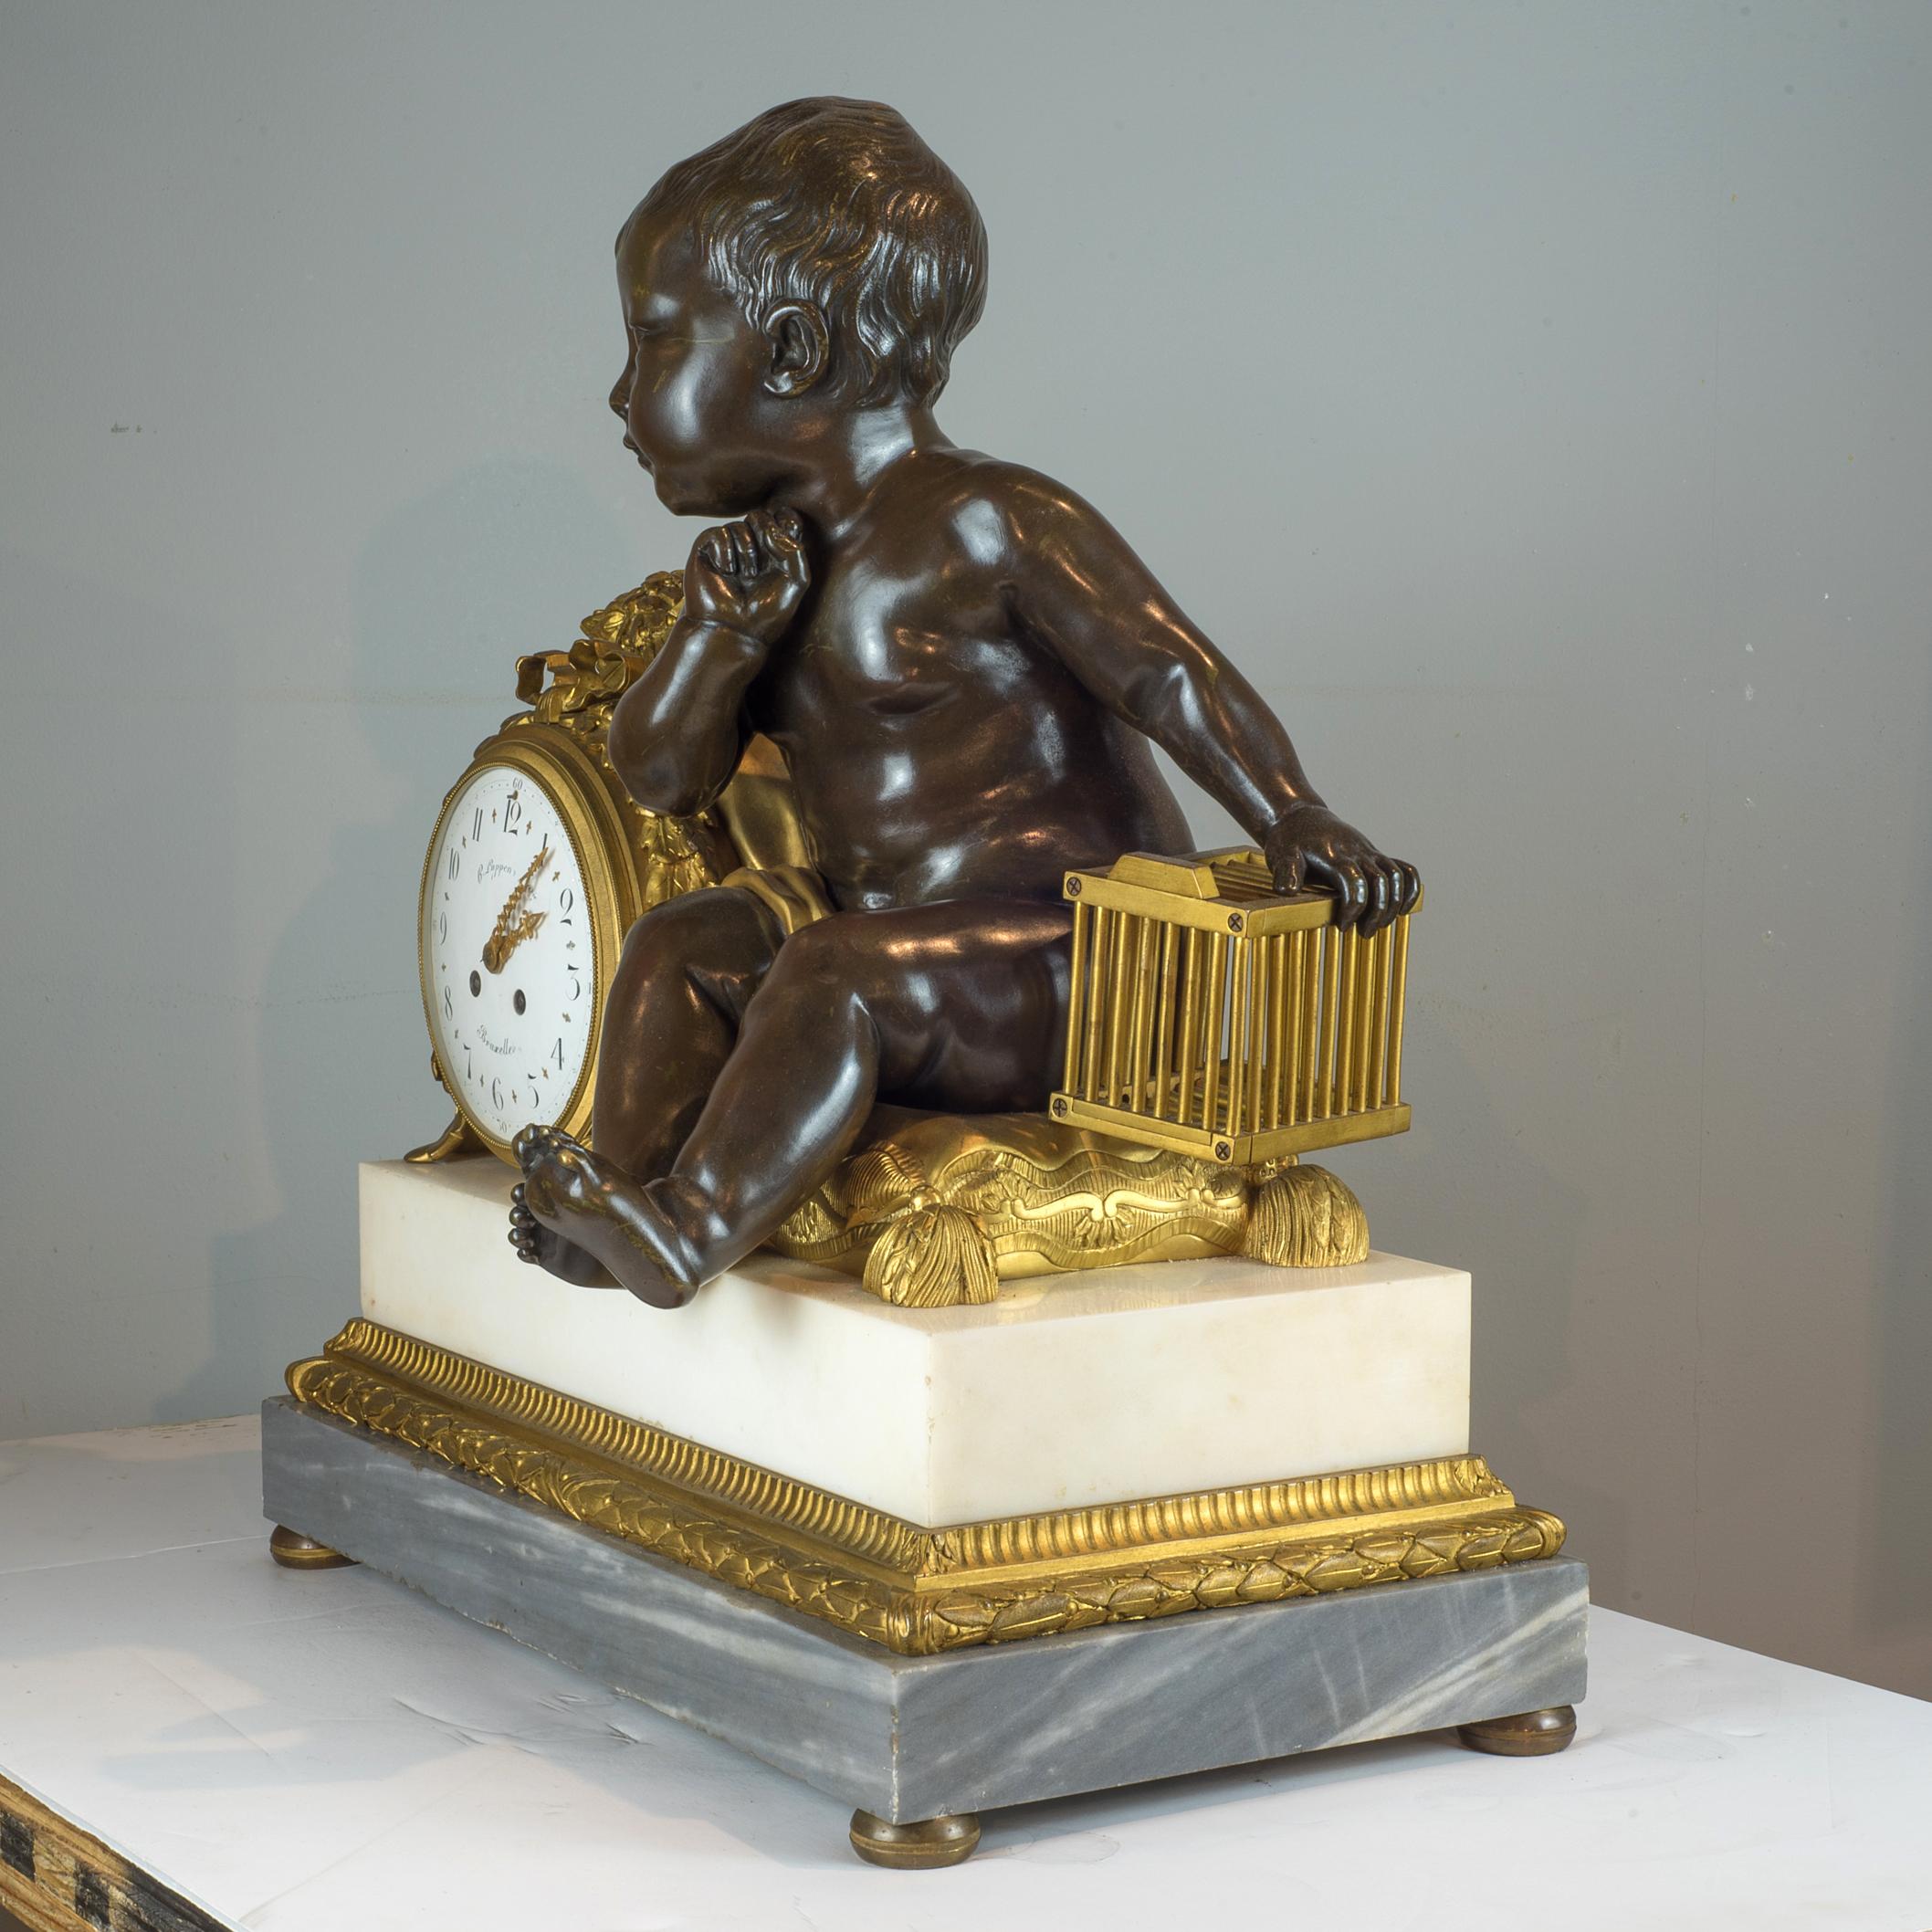 A fabulous ormolu-mounted and patinated bronze white and blue turquin marble three-piece clock set of putti. Comprising a mantel clock and a pair of five-light candelabras molded with putti. The clock with a seated putto and open birdcage after the